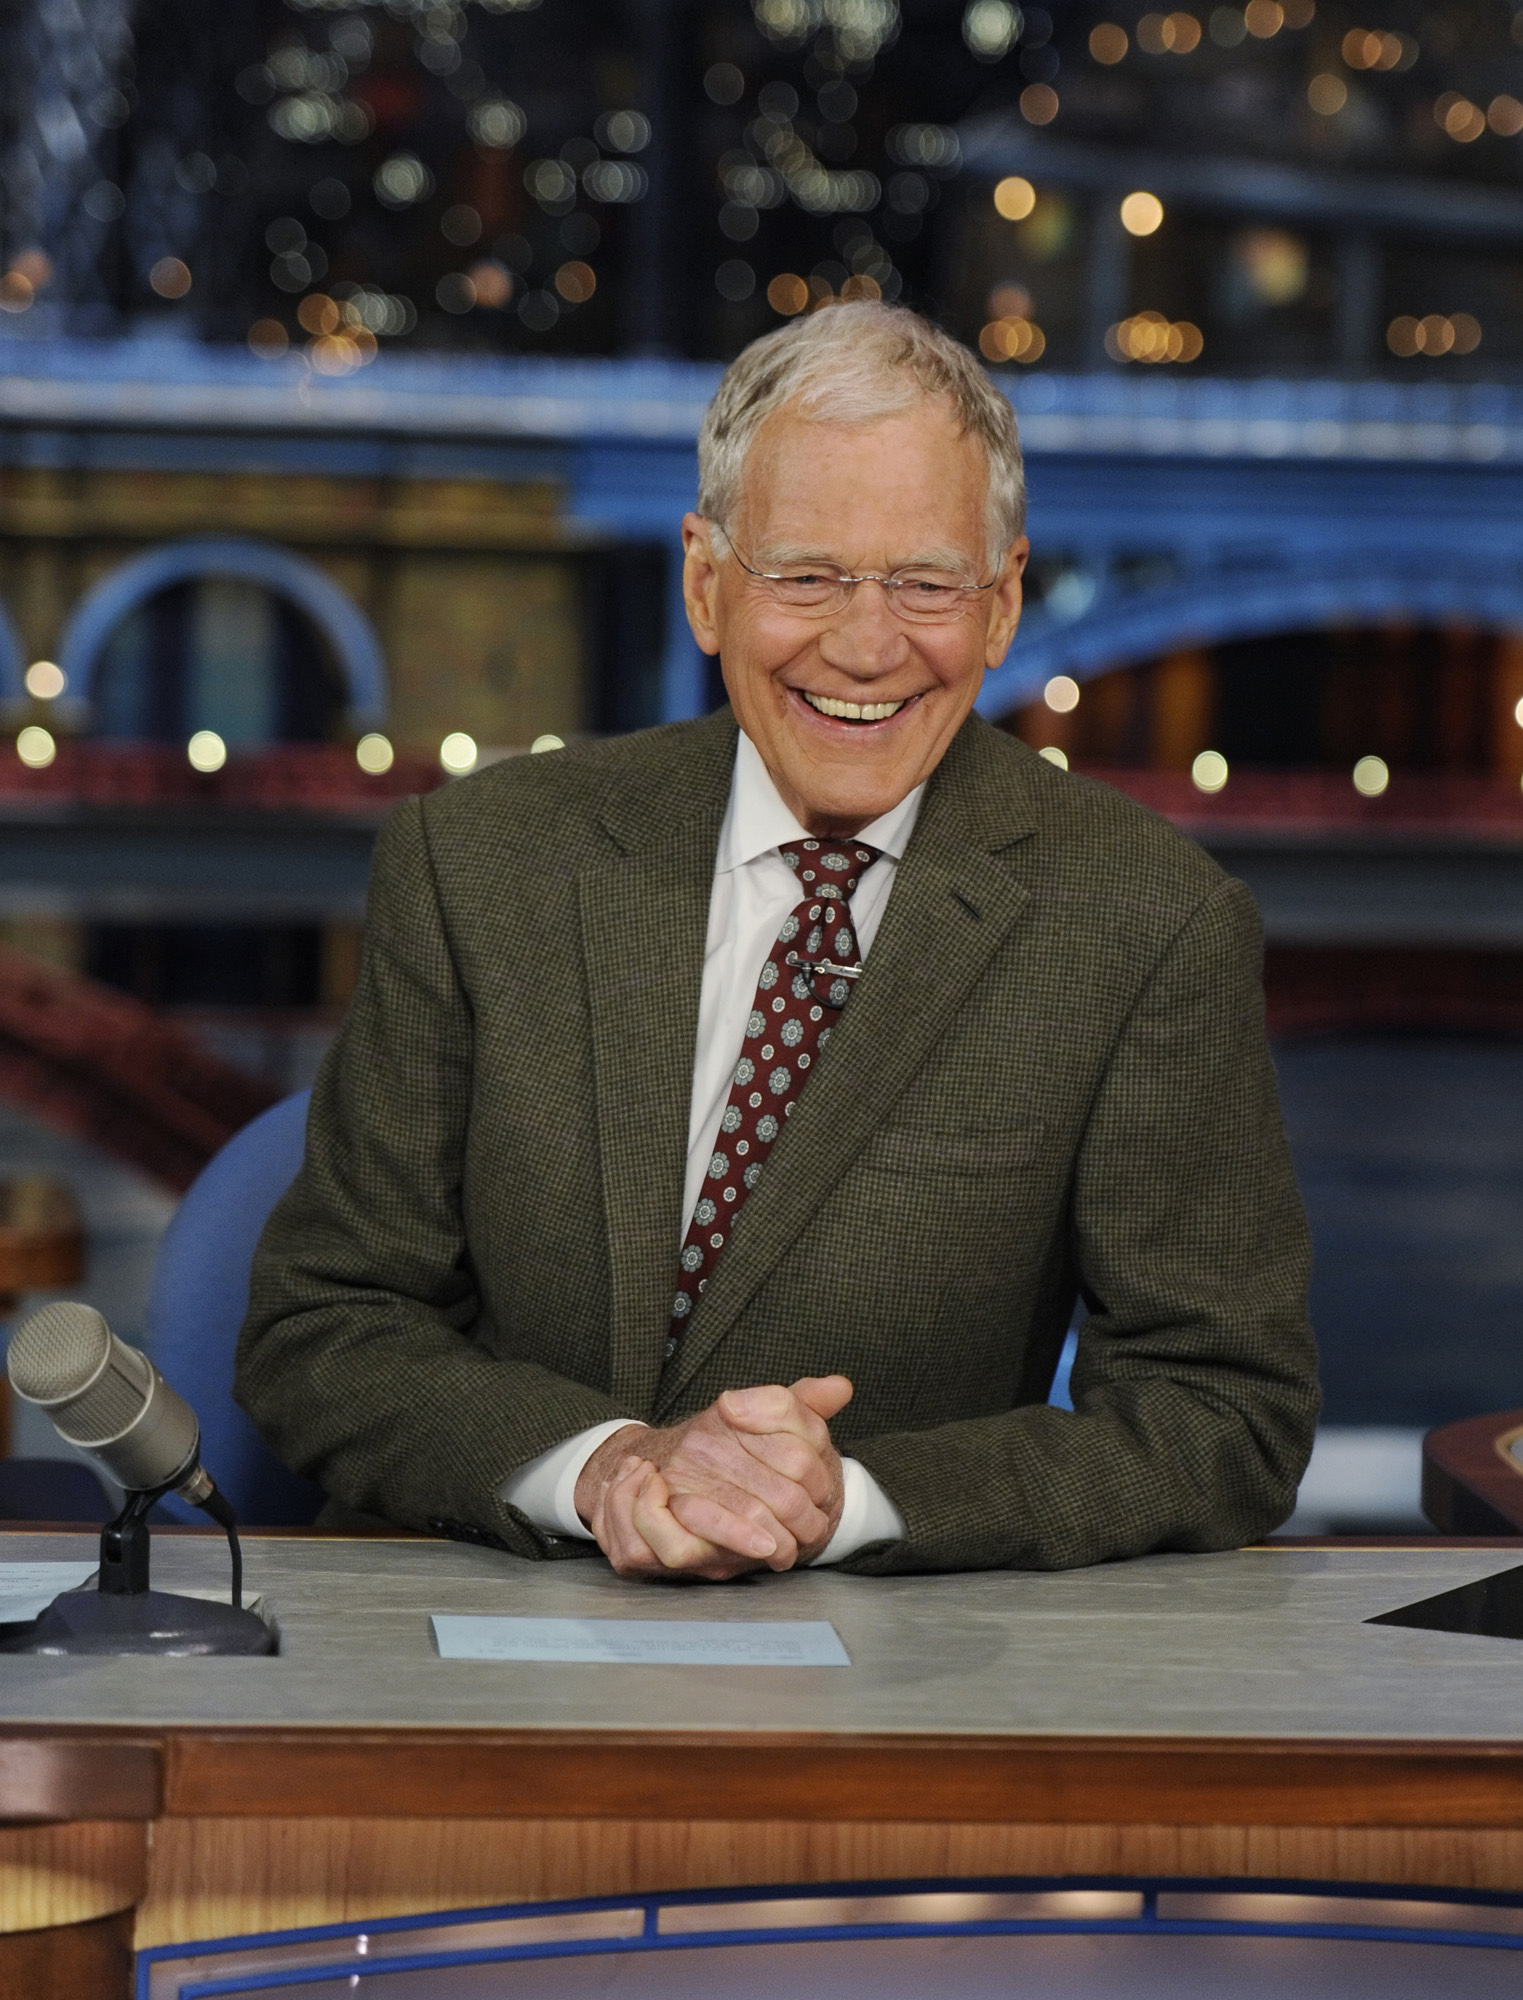 David letterman youtube retirement investing fake meat company ipo